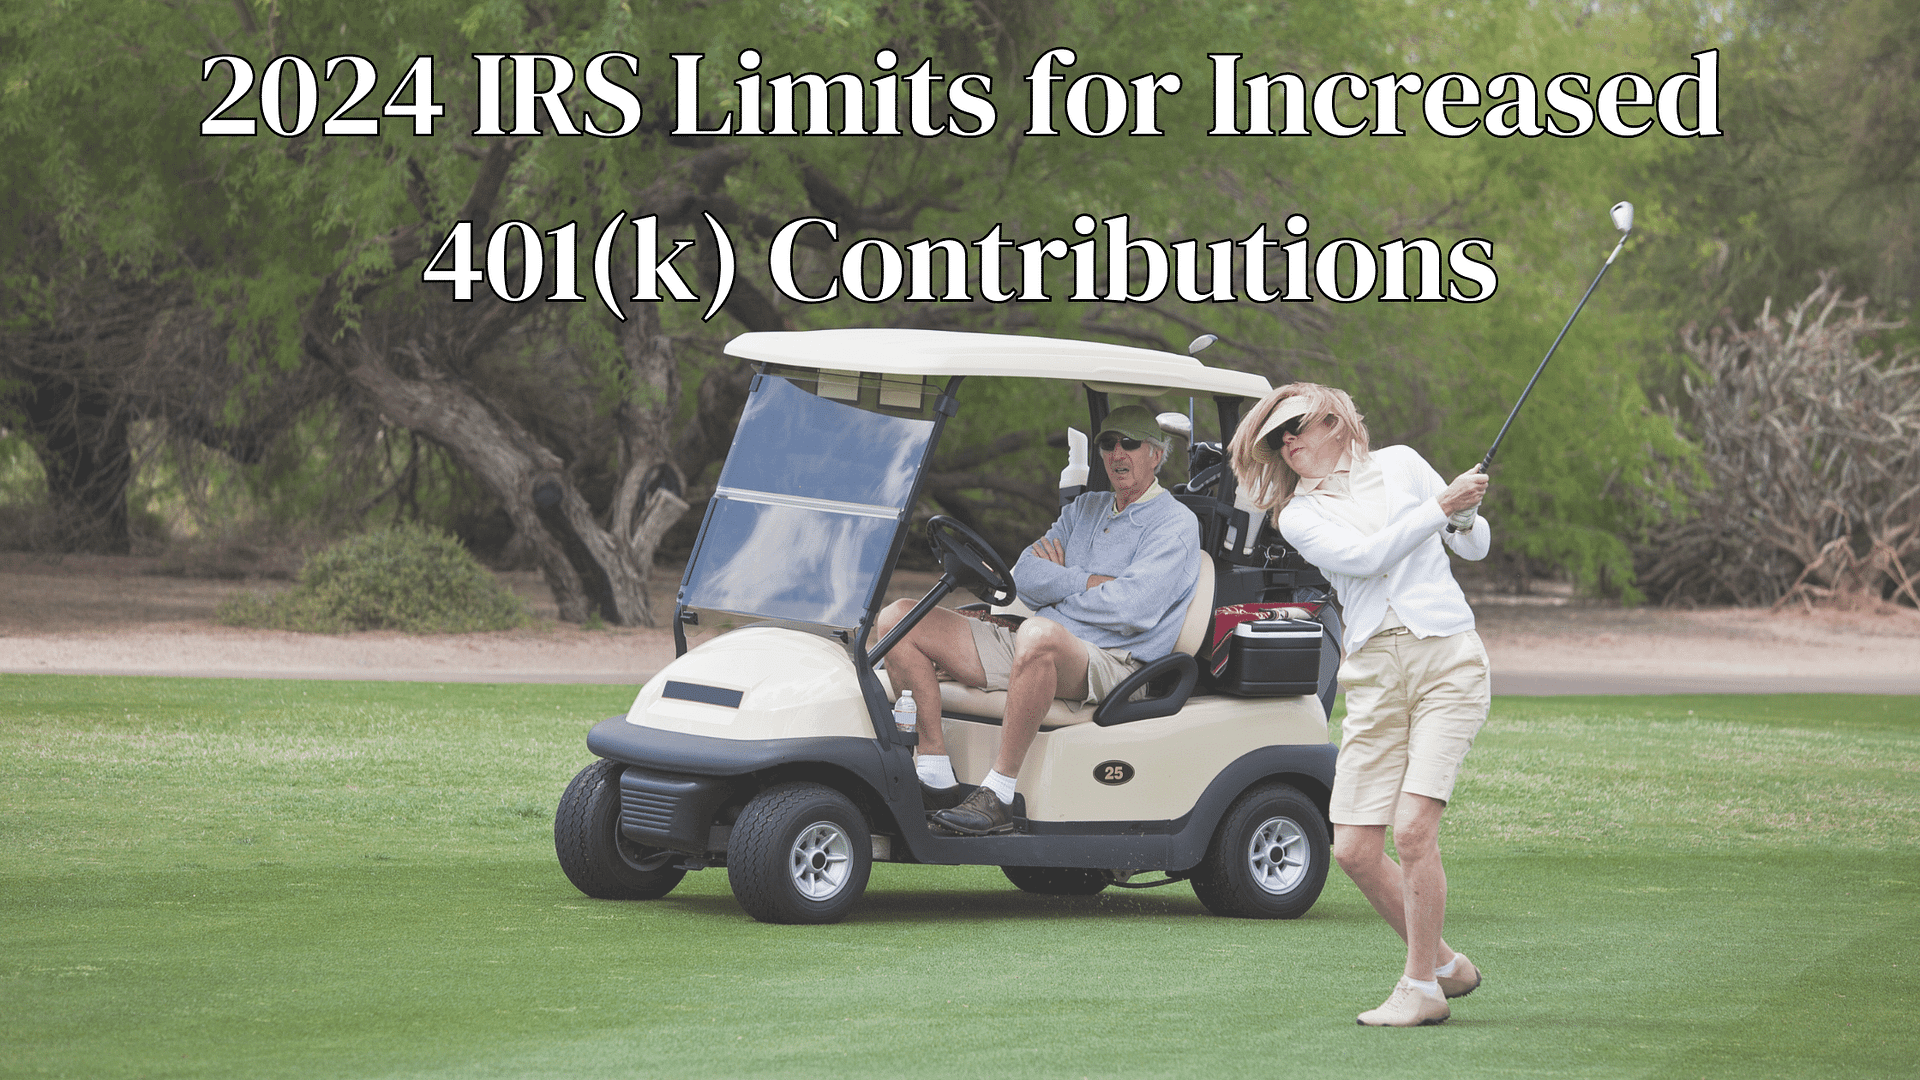 2024 IRS Limits for Increased 401(k) Contributions